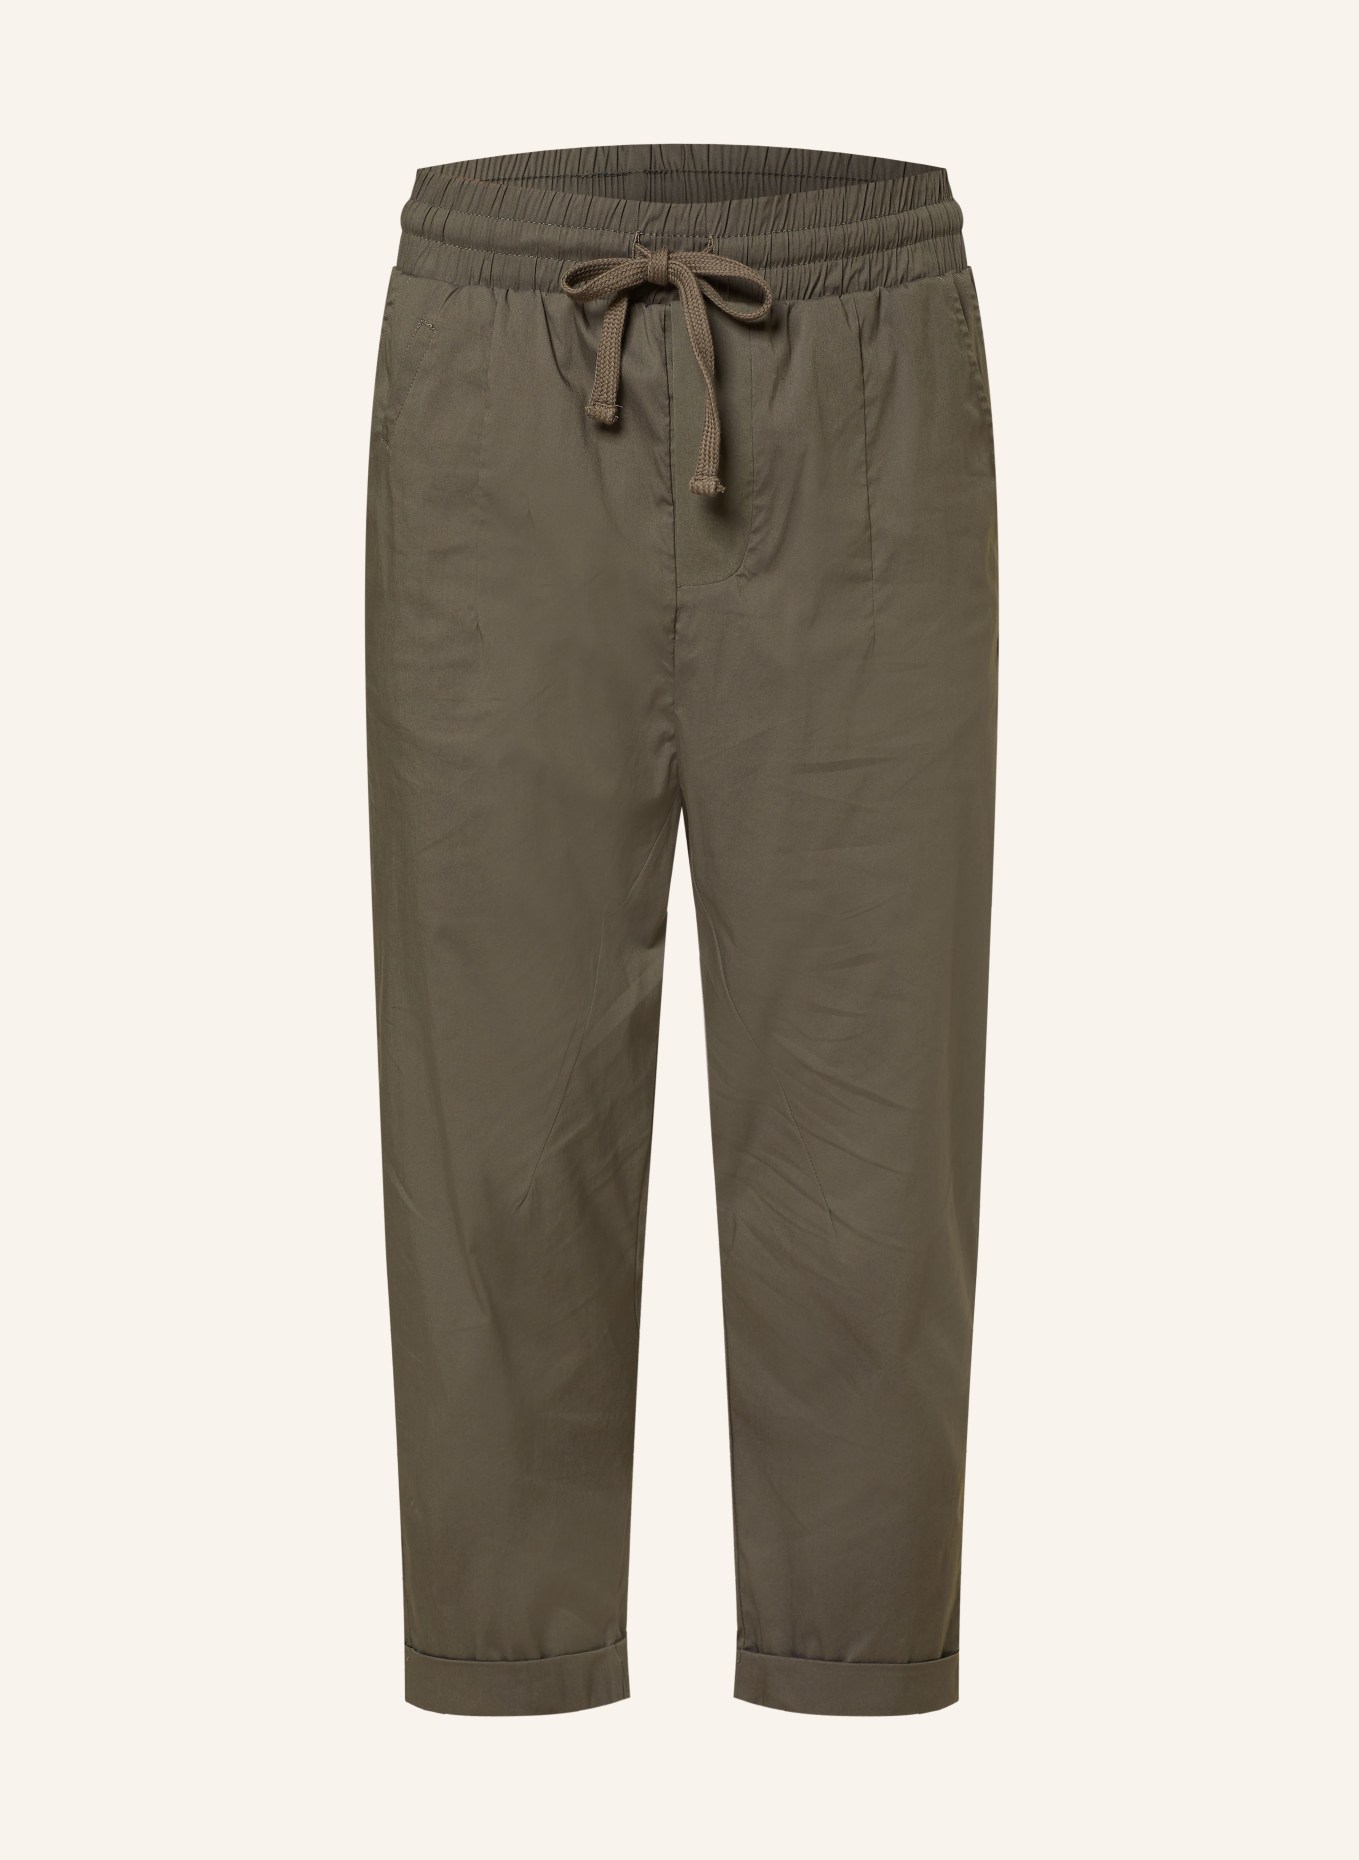 thom/krom Pants in jogger style slim fit, Color: KHAKI (Image 1)